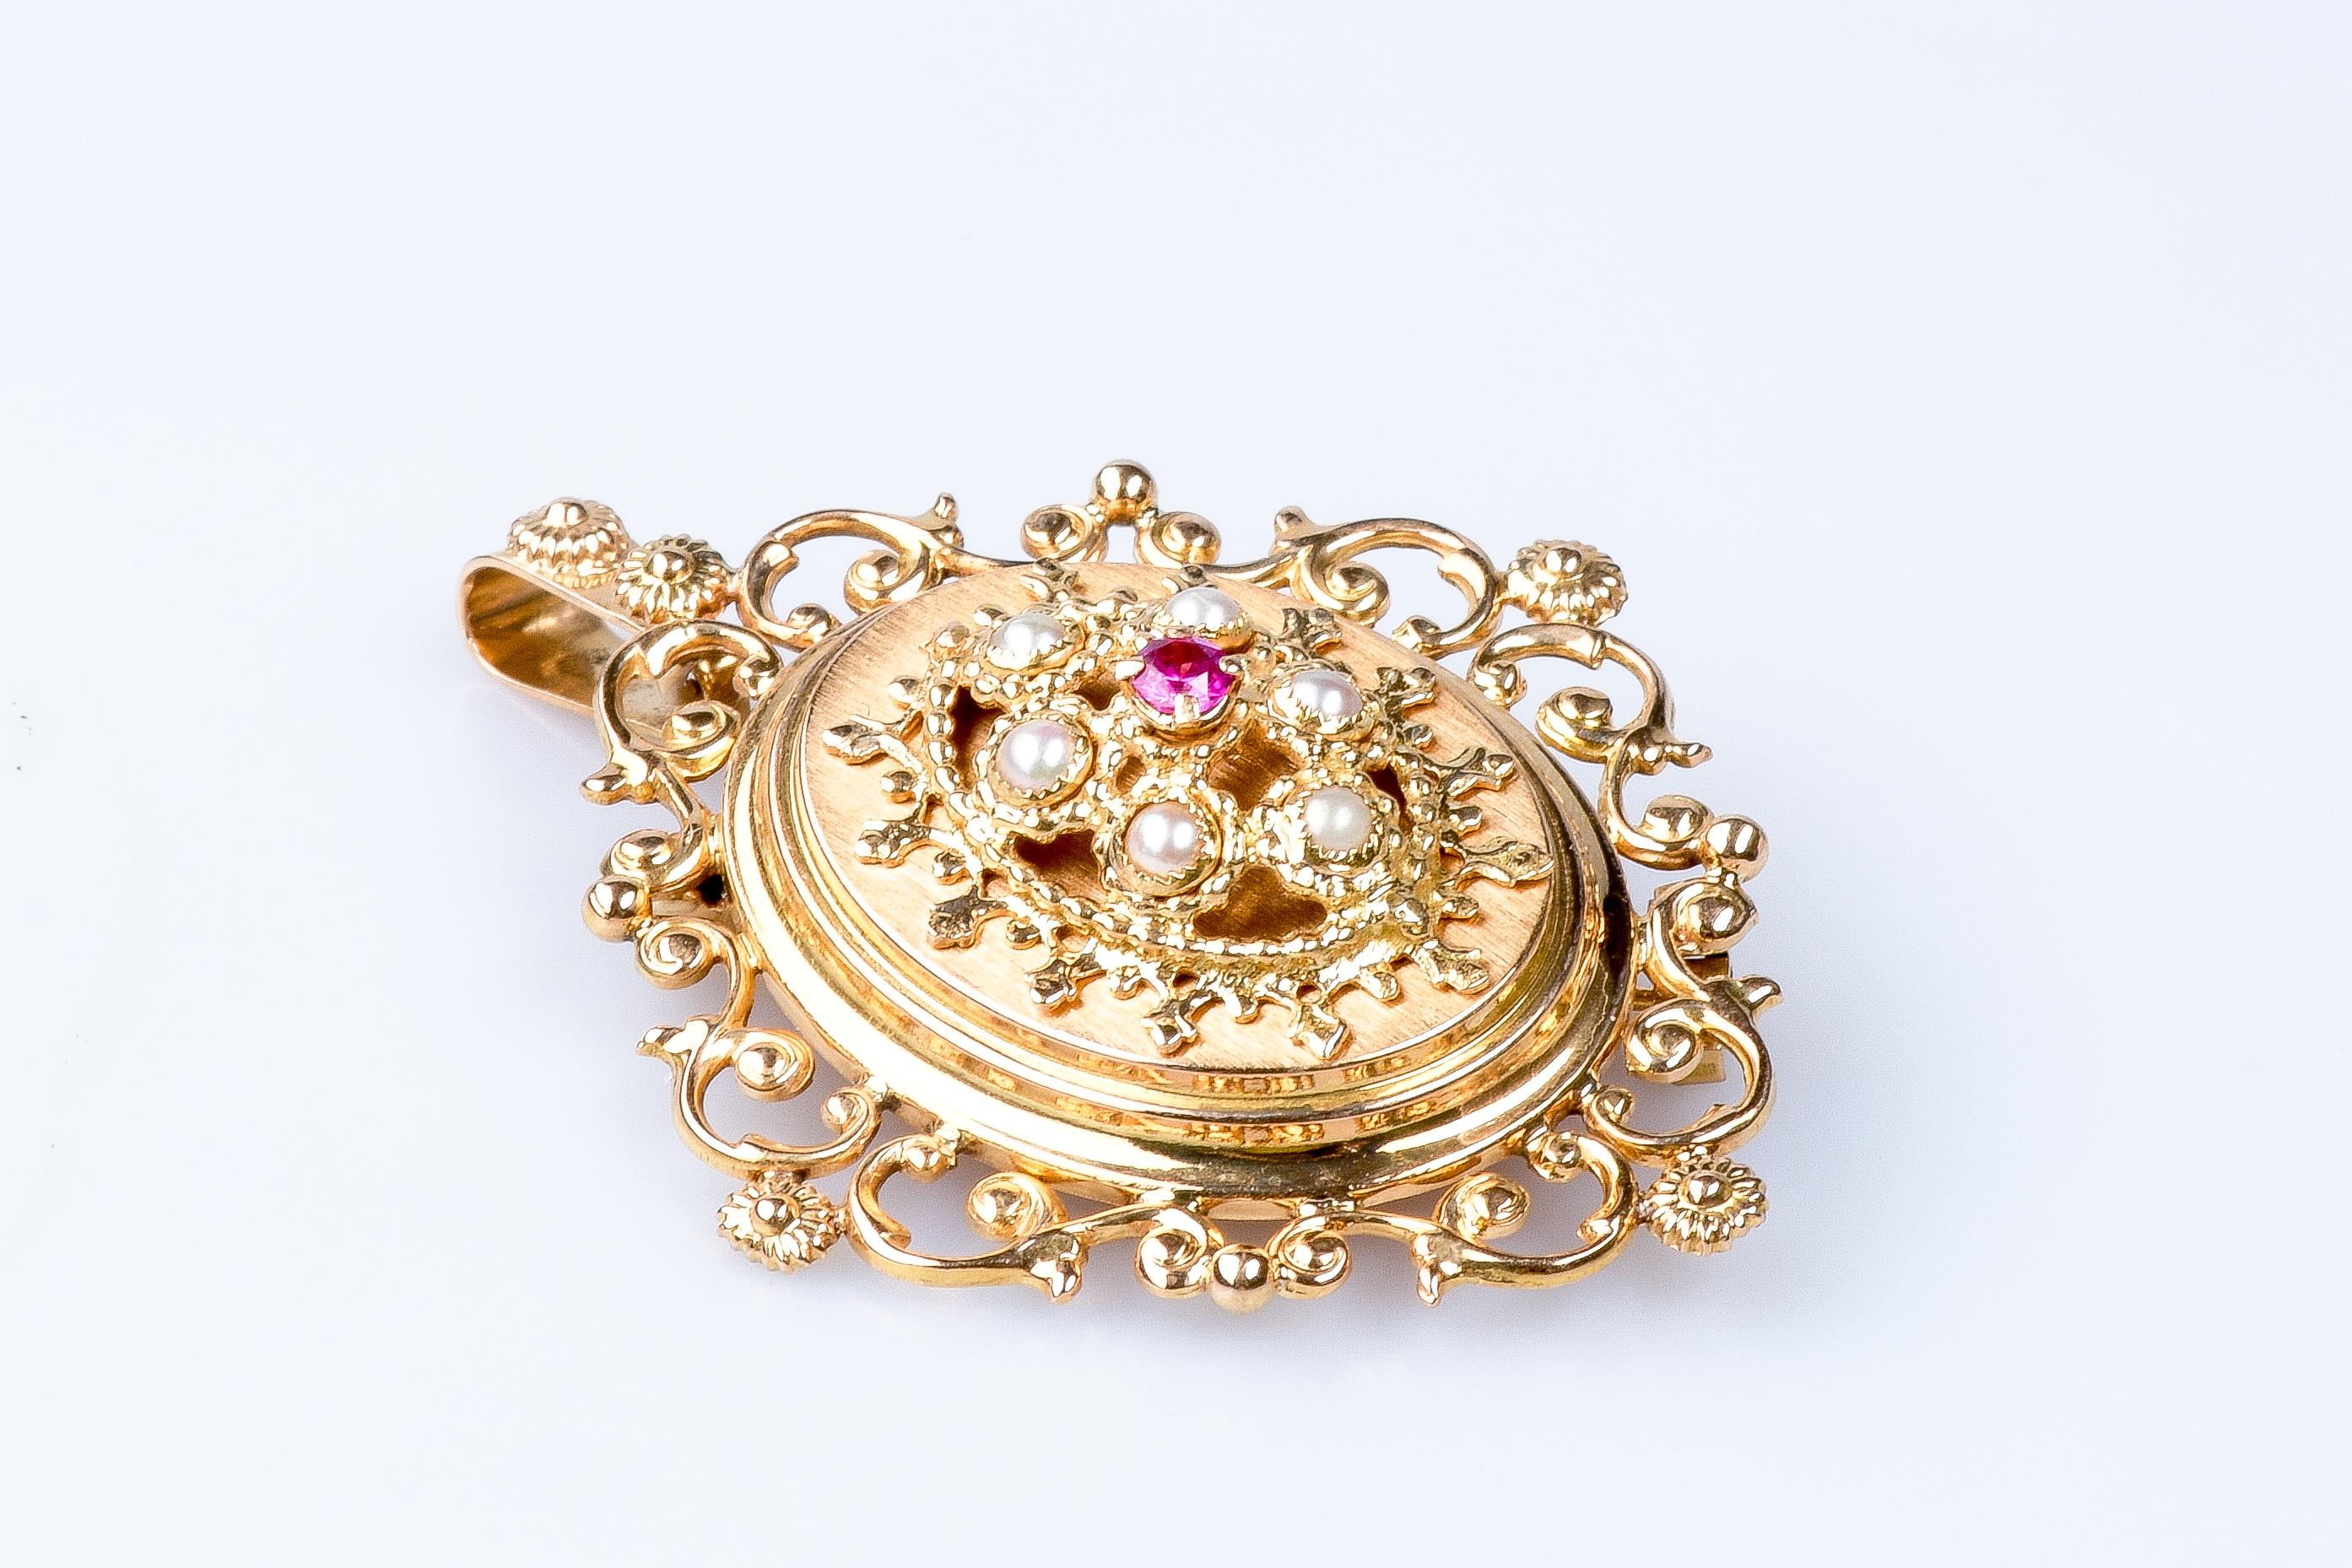 18 carat pink gold brooch or/and pendant designed with 1 round ruby weighing 0.06 carats and 6 round white freshwater pearls of 2.00 millimeters each.

 Weight : 8.00 gr.

Dimensions : 4.70 x 3.60 x 1.40 cm

Jewel delivered in a luxurious box with a